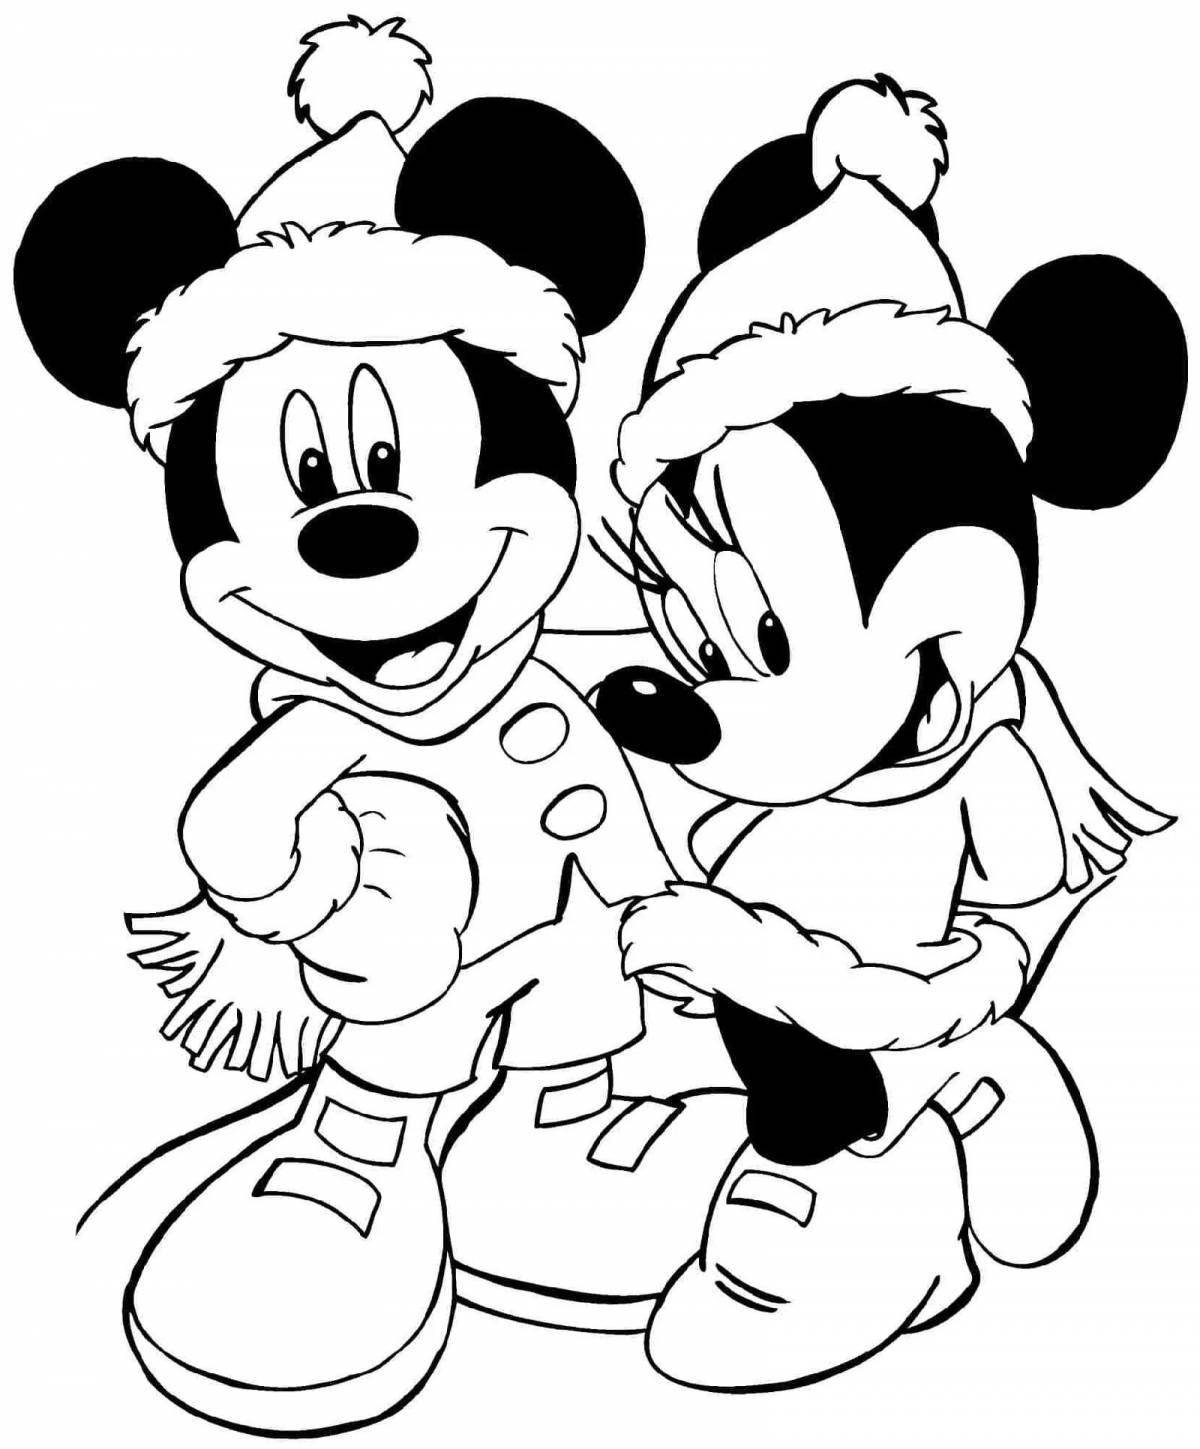 Mickey Mouse and Minnie Mouse #5